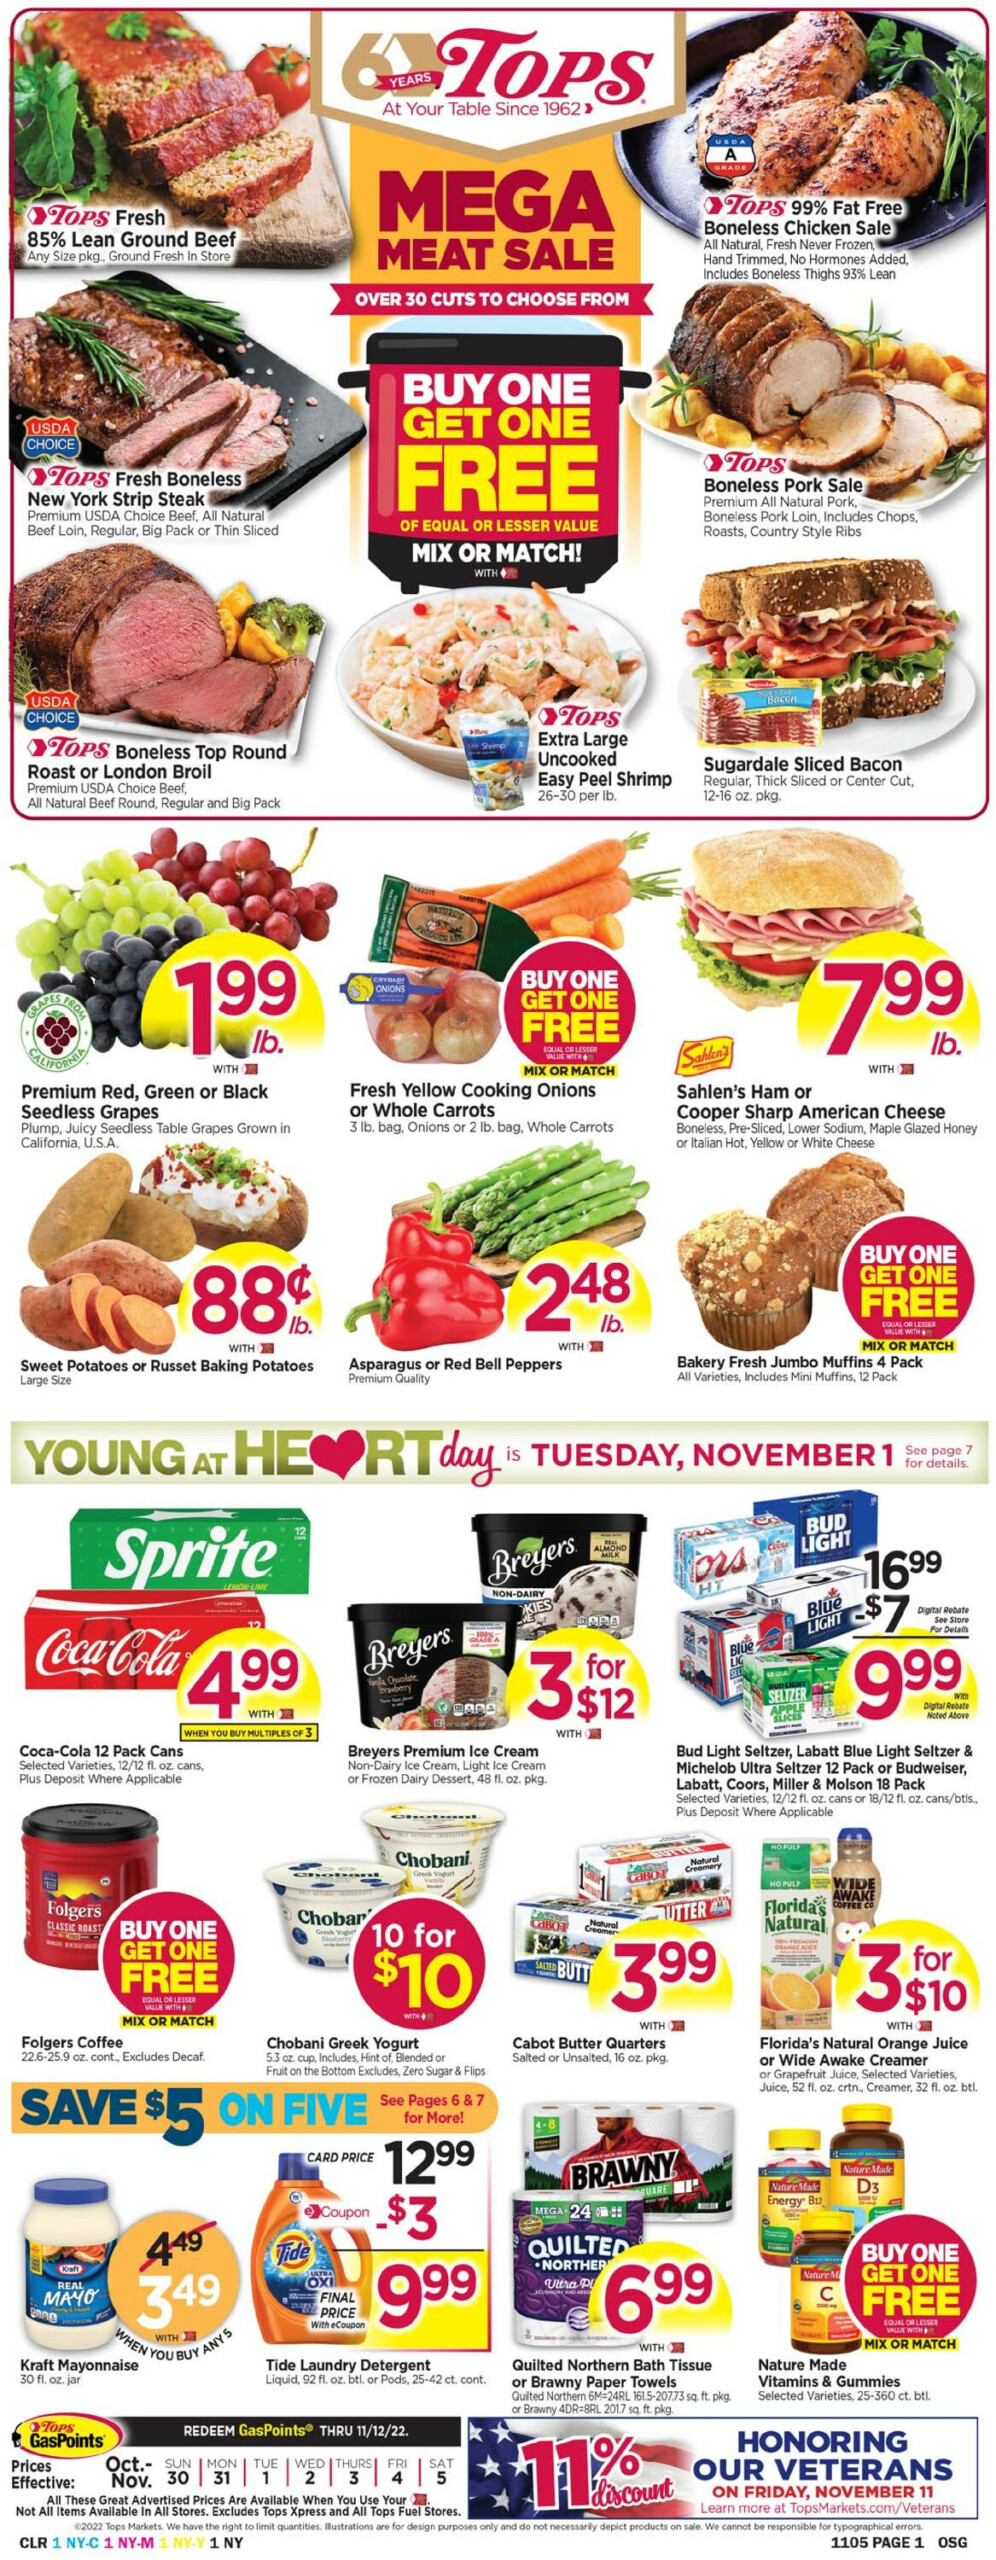 Tops Friendly Markets Current Weekly Ad 10 30 11 05 2022